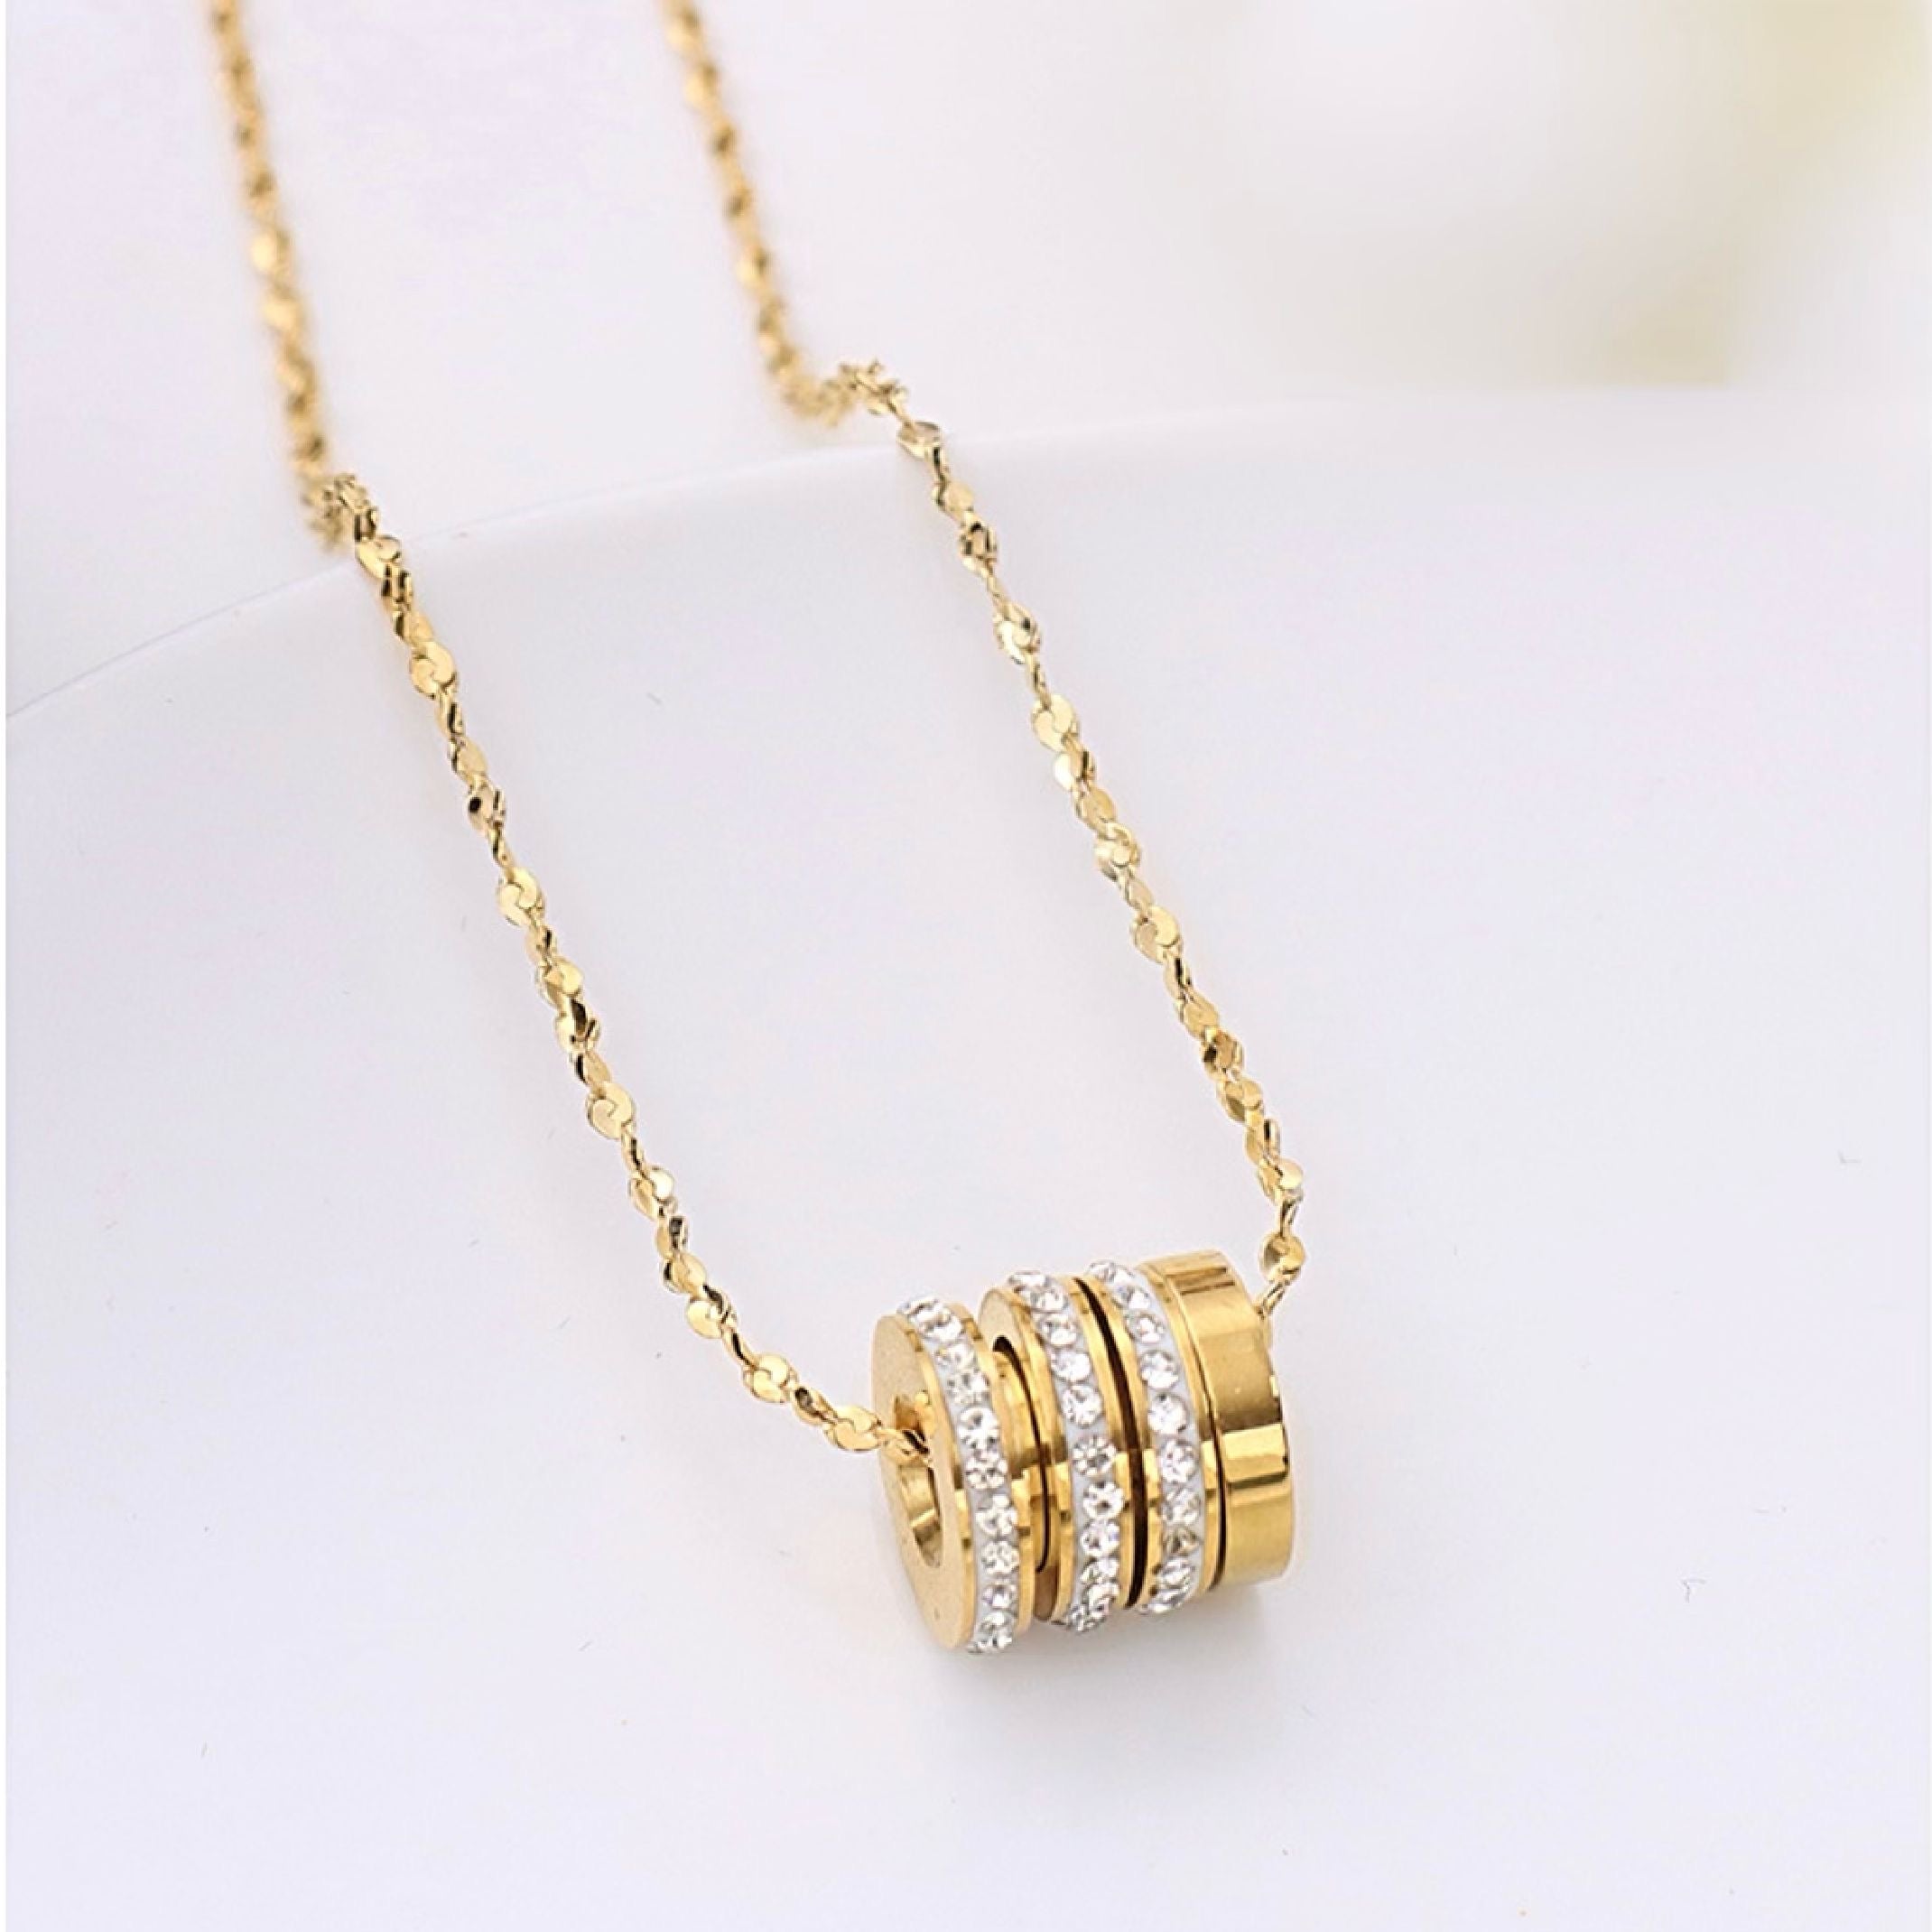 Gold ring necklace 